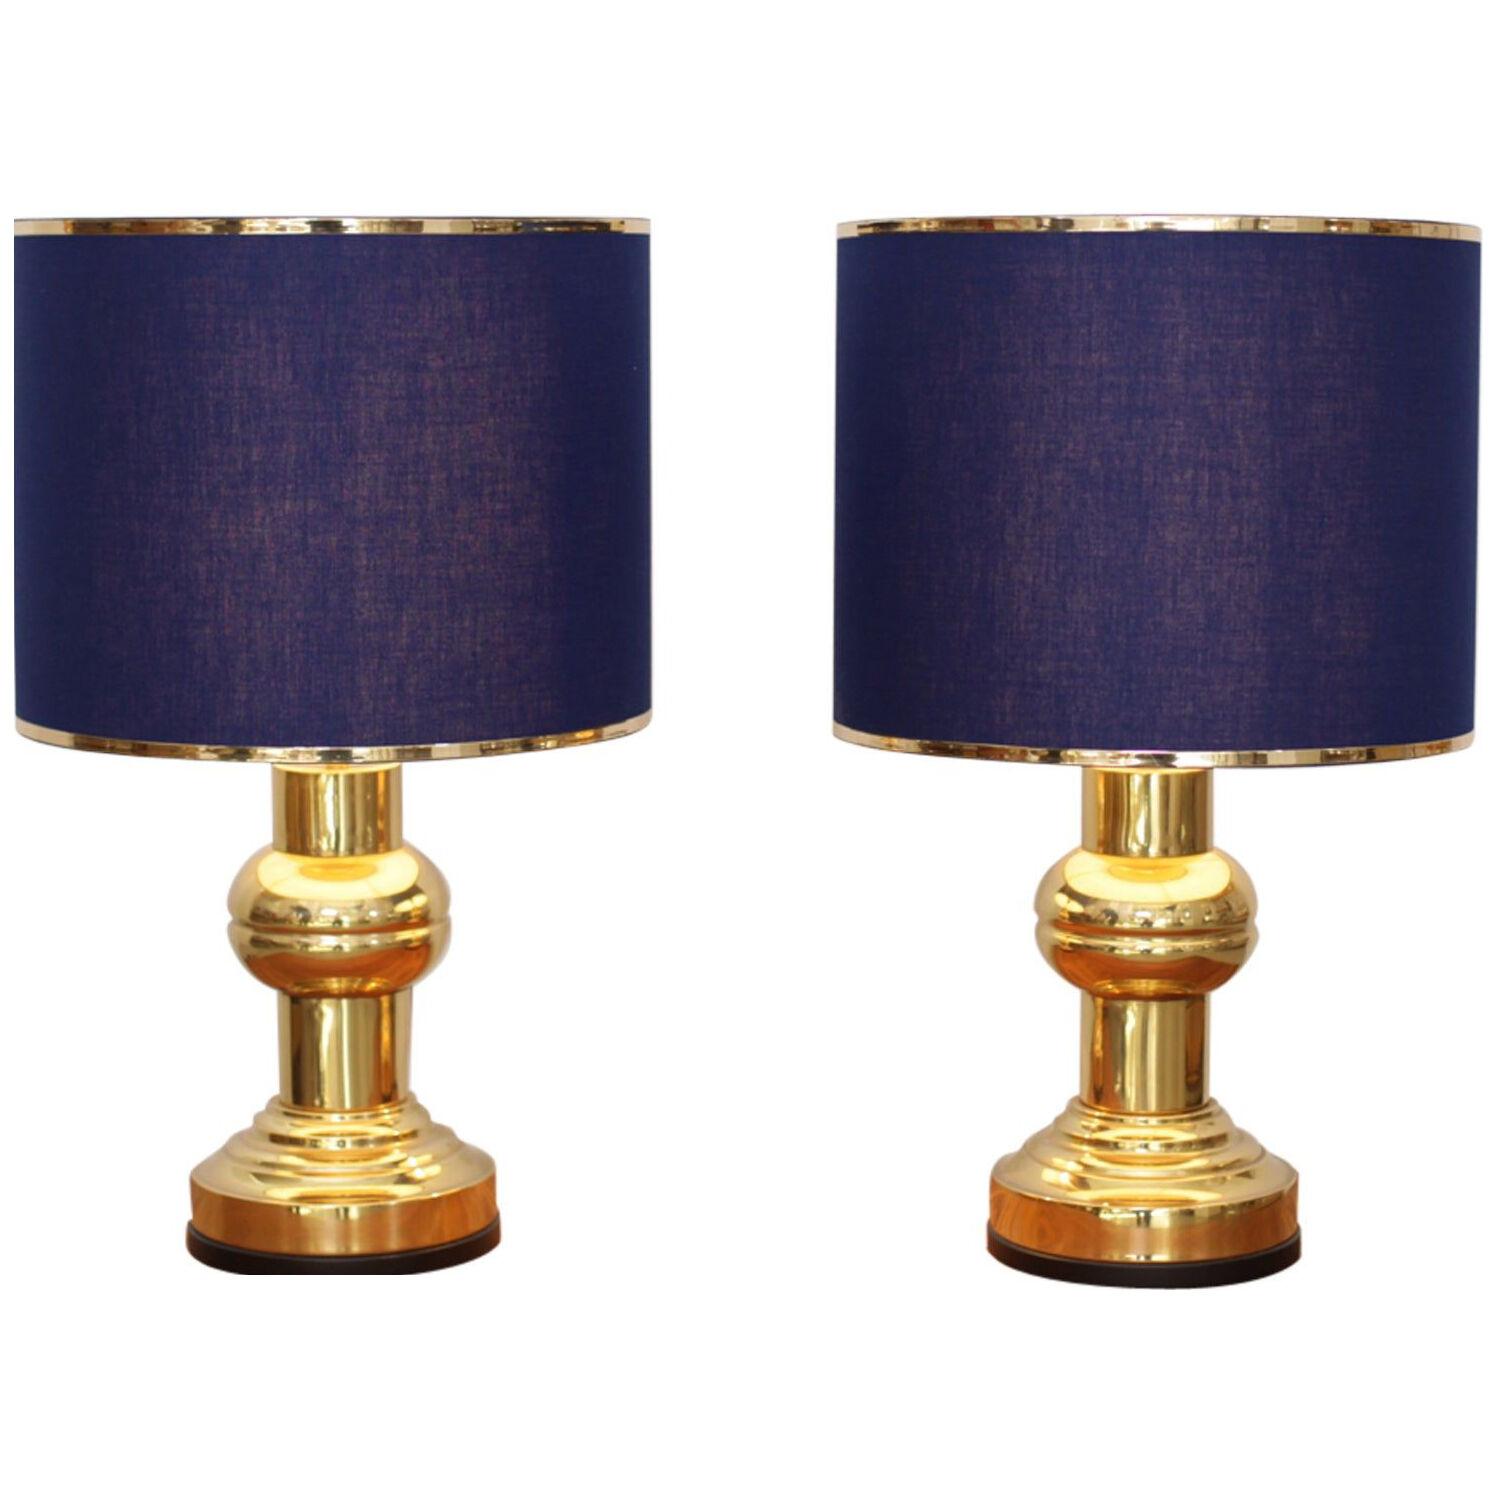 Set of Two Art Deco Style Table Lamps in Brass with Dark Blue Shades